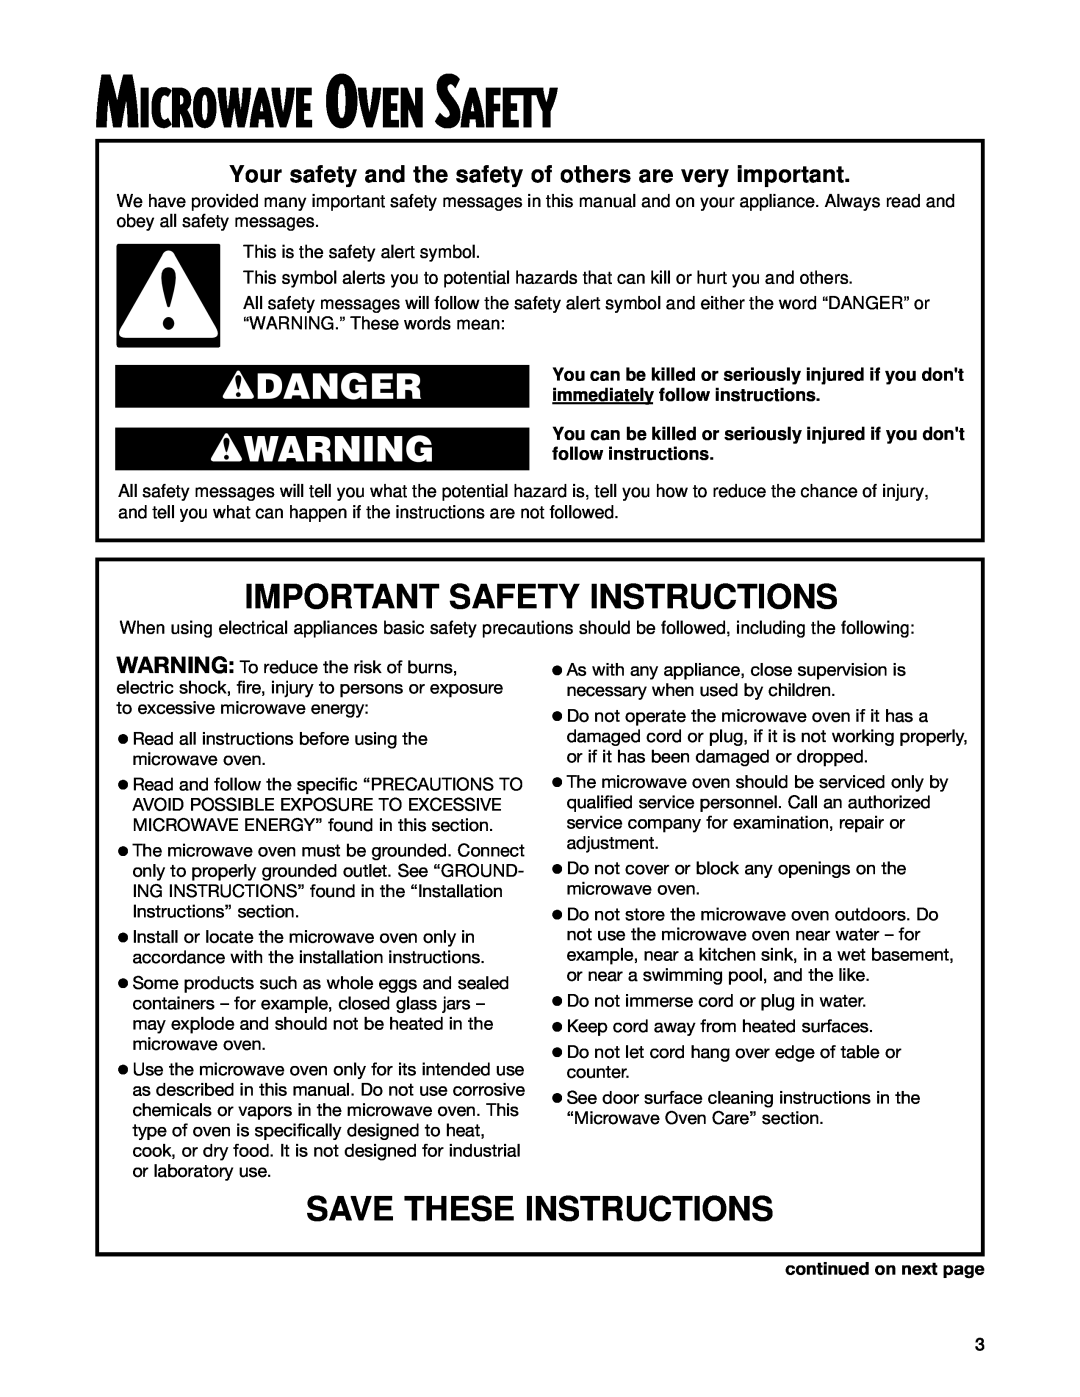 Whirlpool MT4210SL Microwave Oven Safety, wDANGER wWARNING, Important Safety Instructions, Save These Instructions 